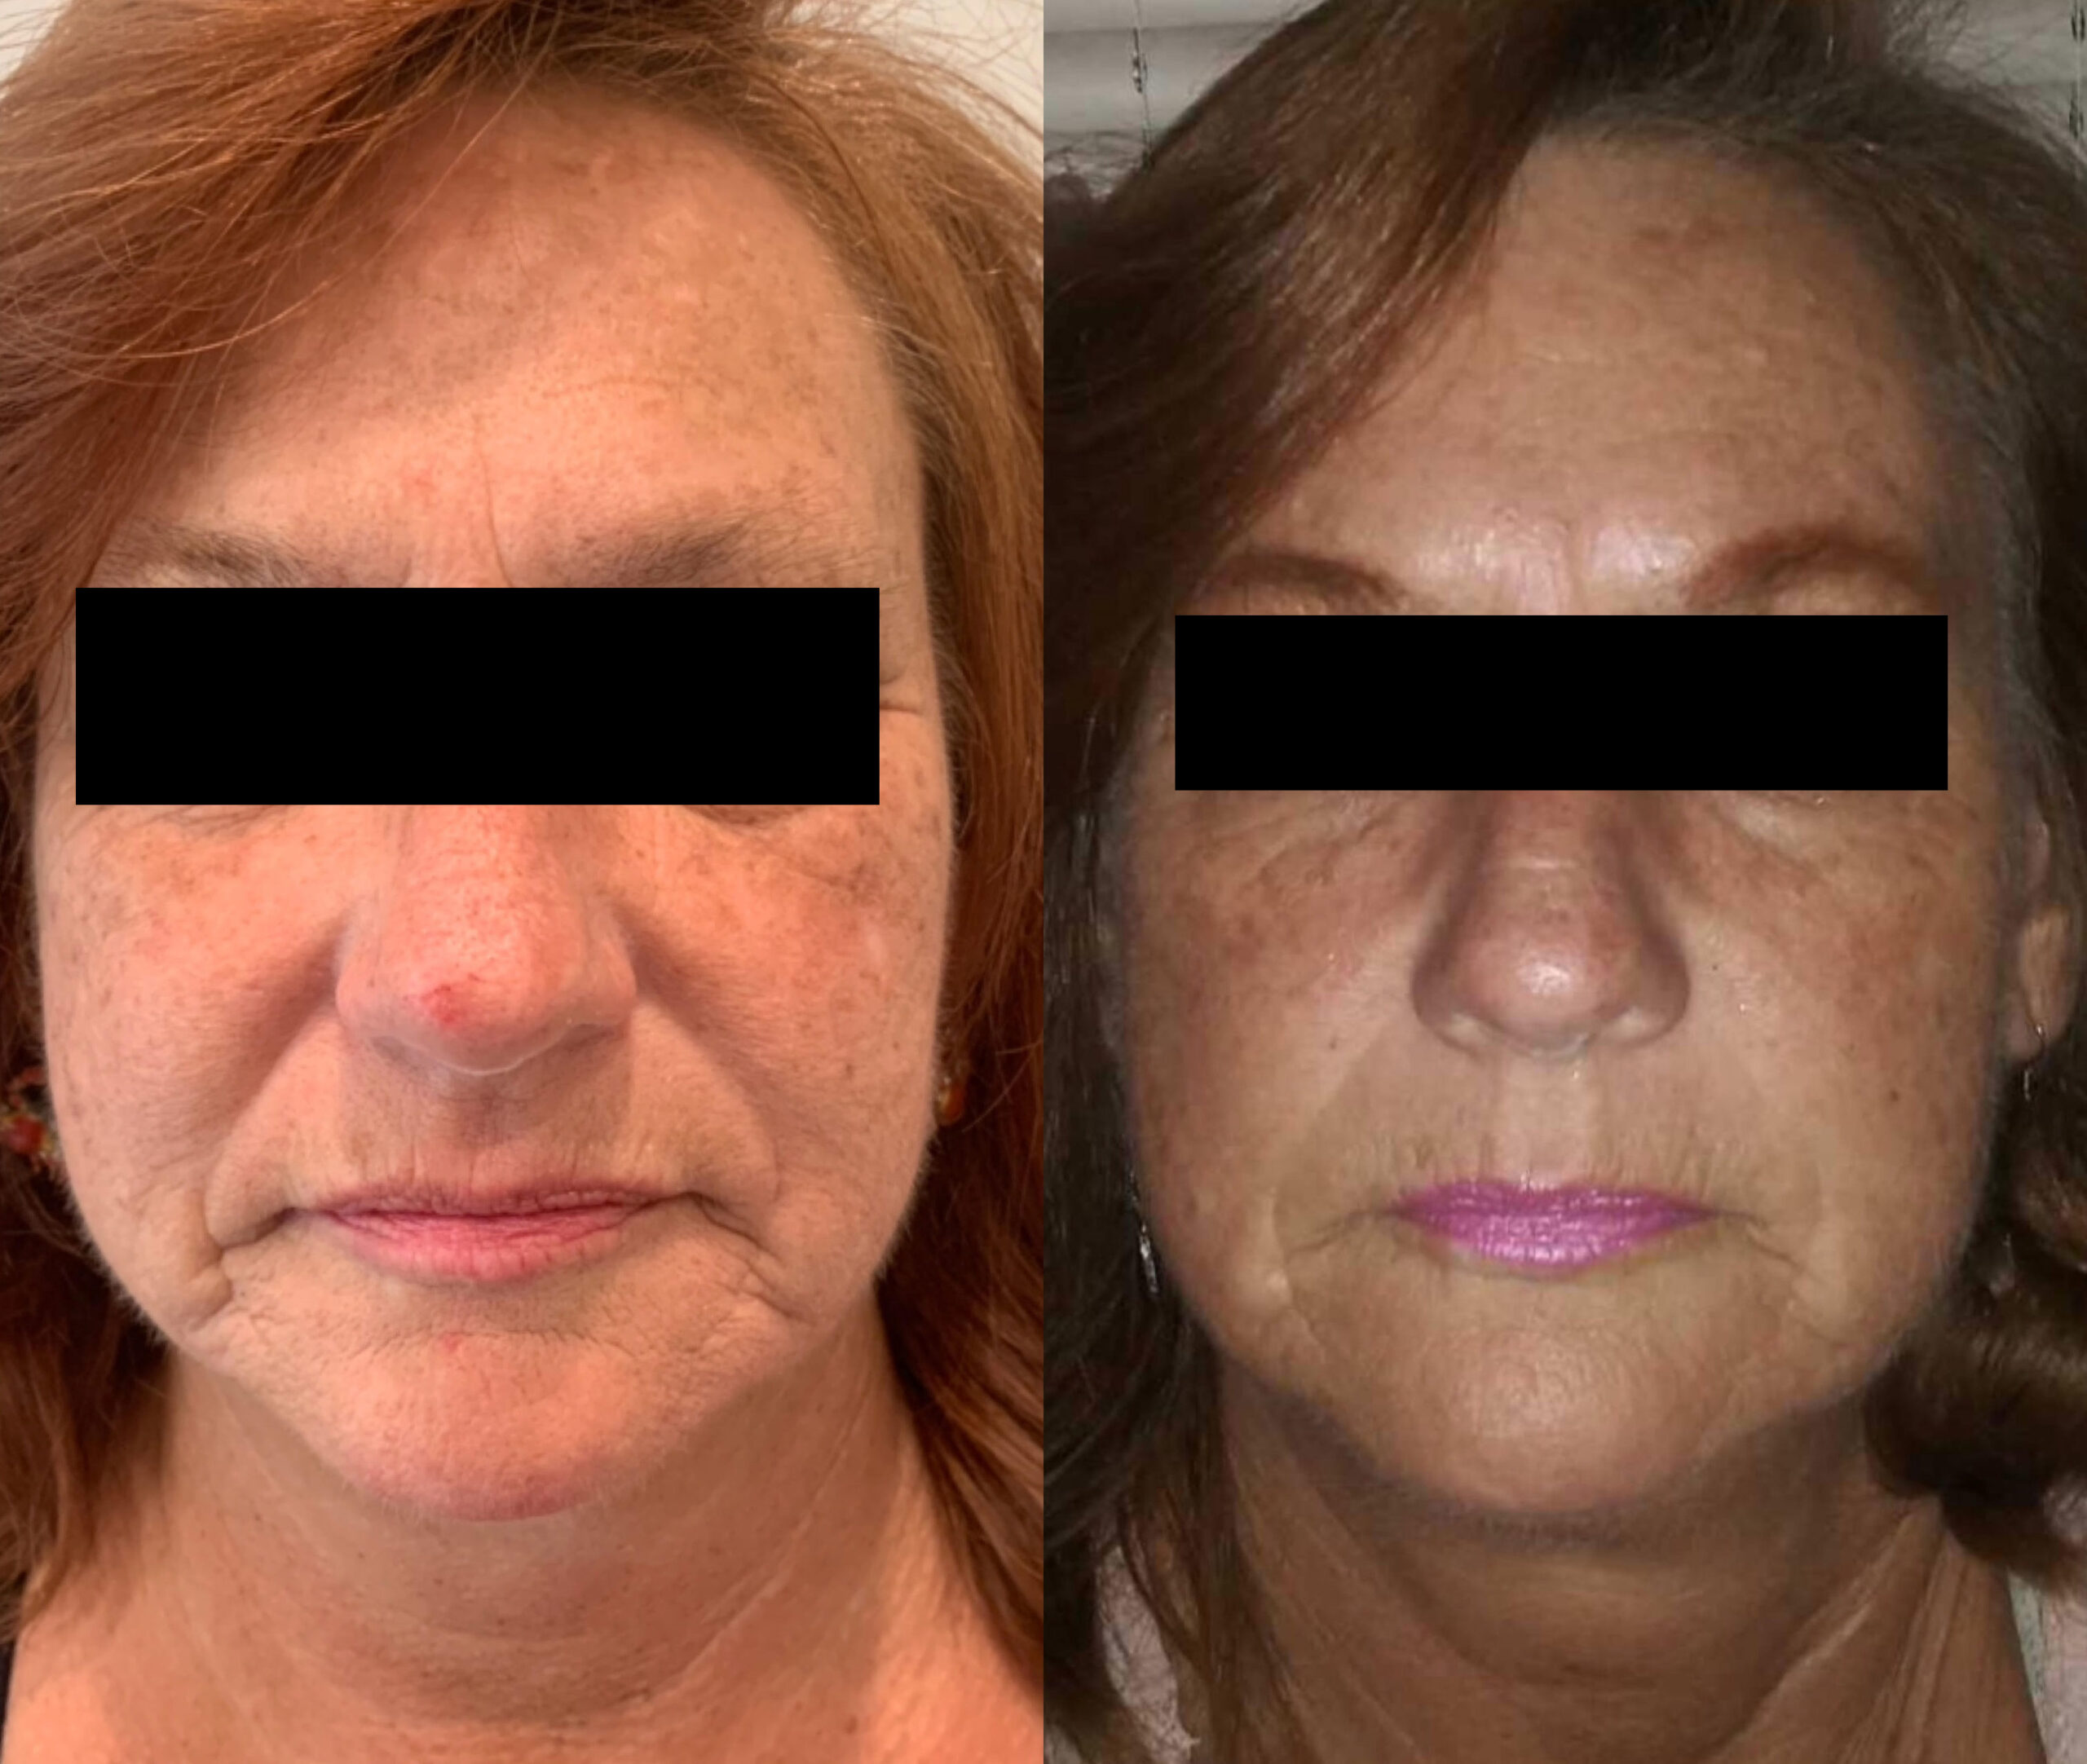 microneedling before after